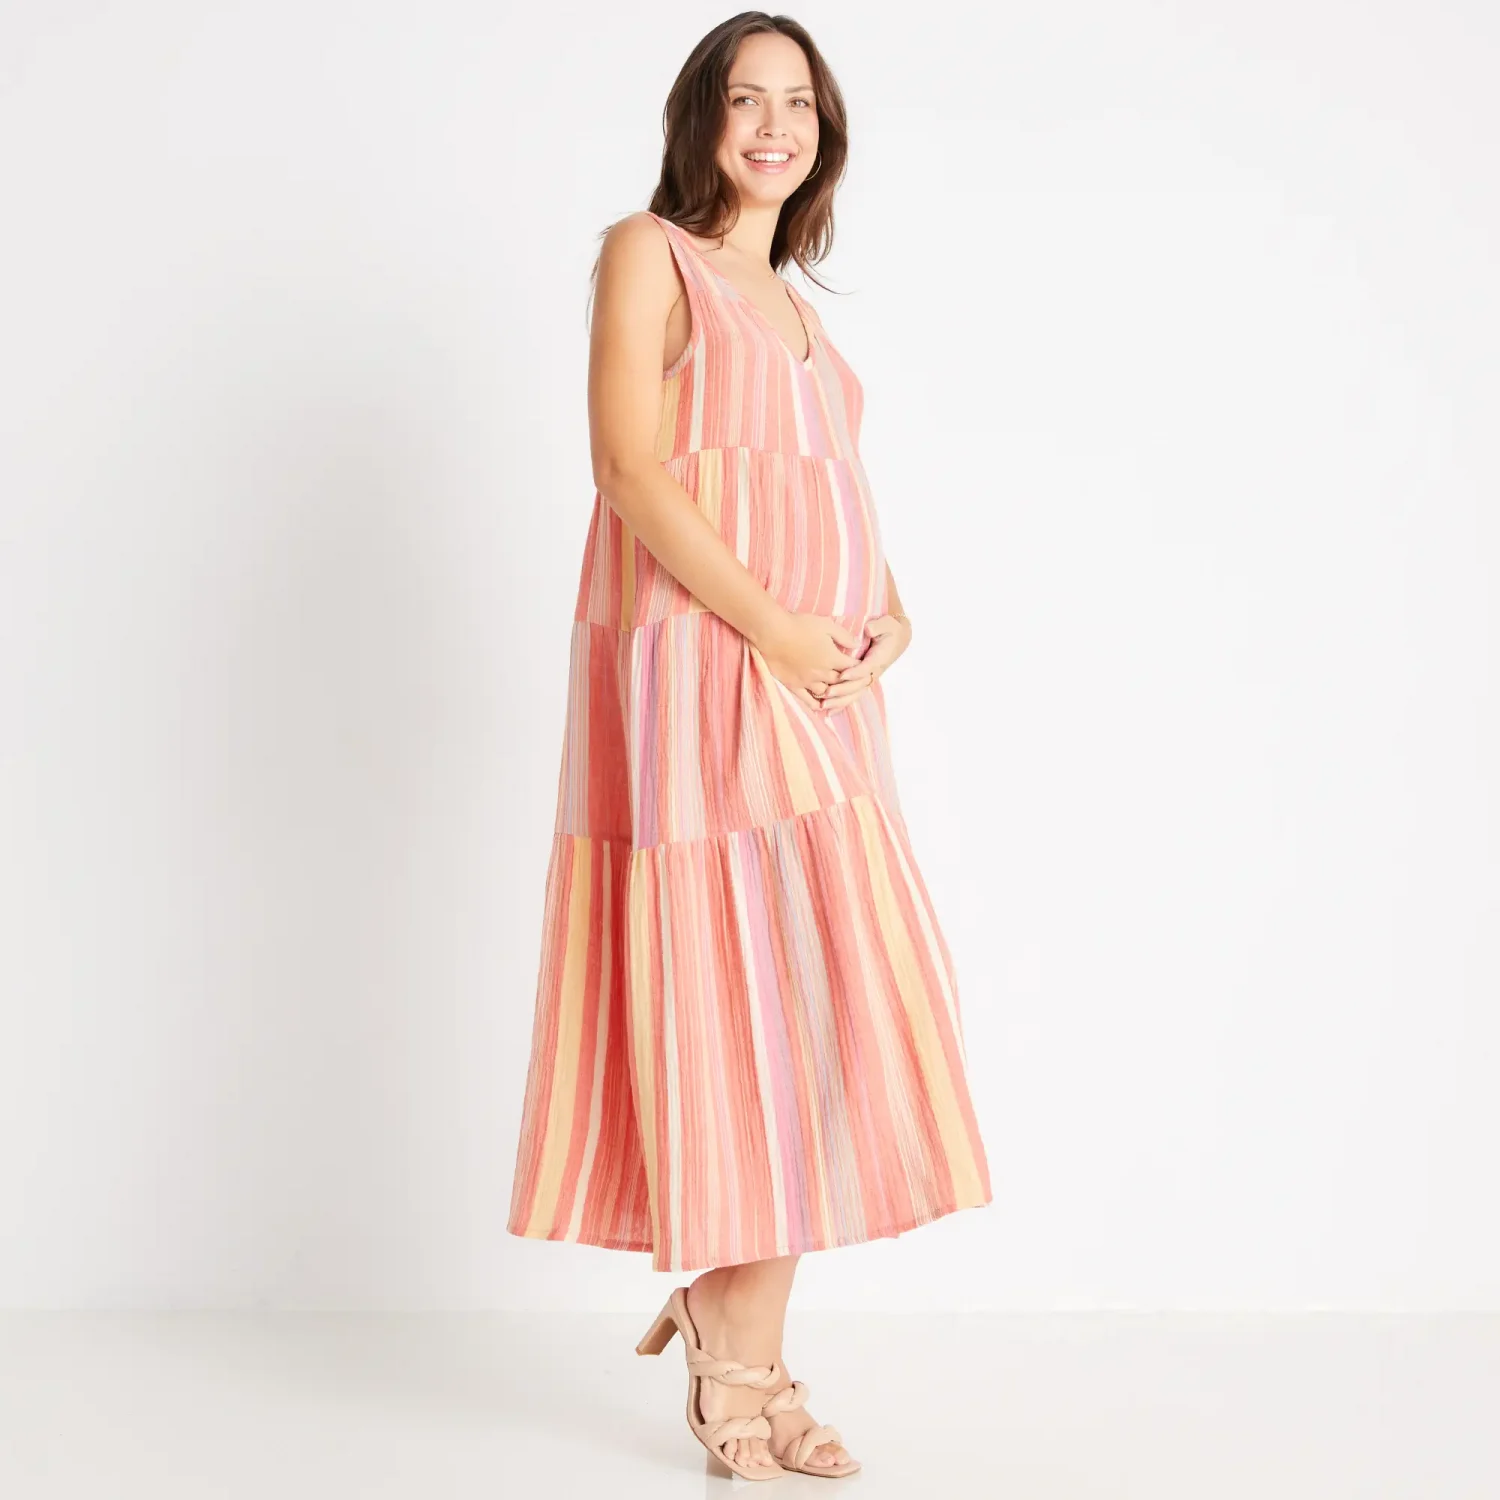 Marine Layer brand contemporary and stylish maternity friendly printed maxi dresses